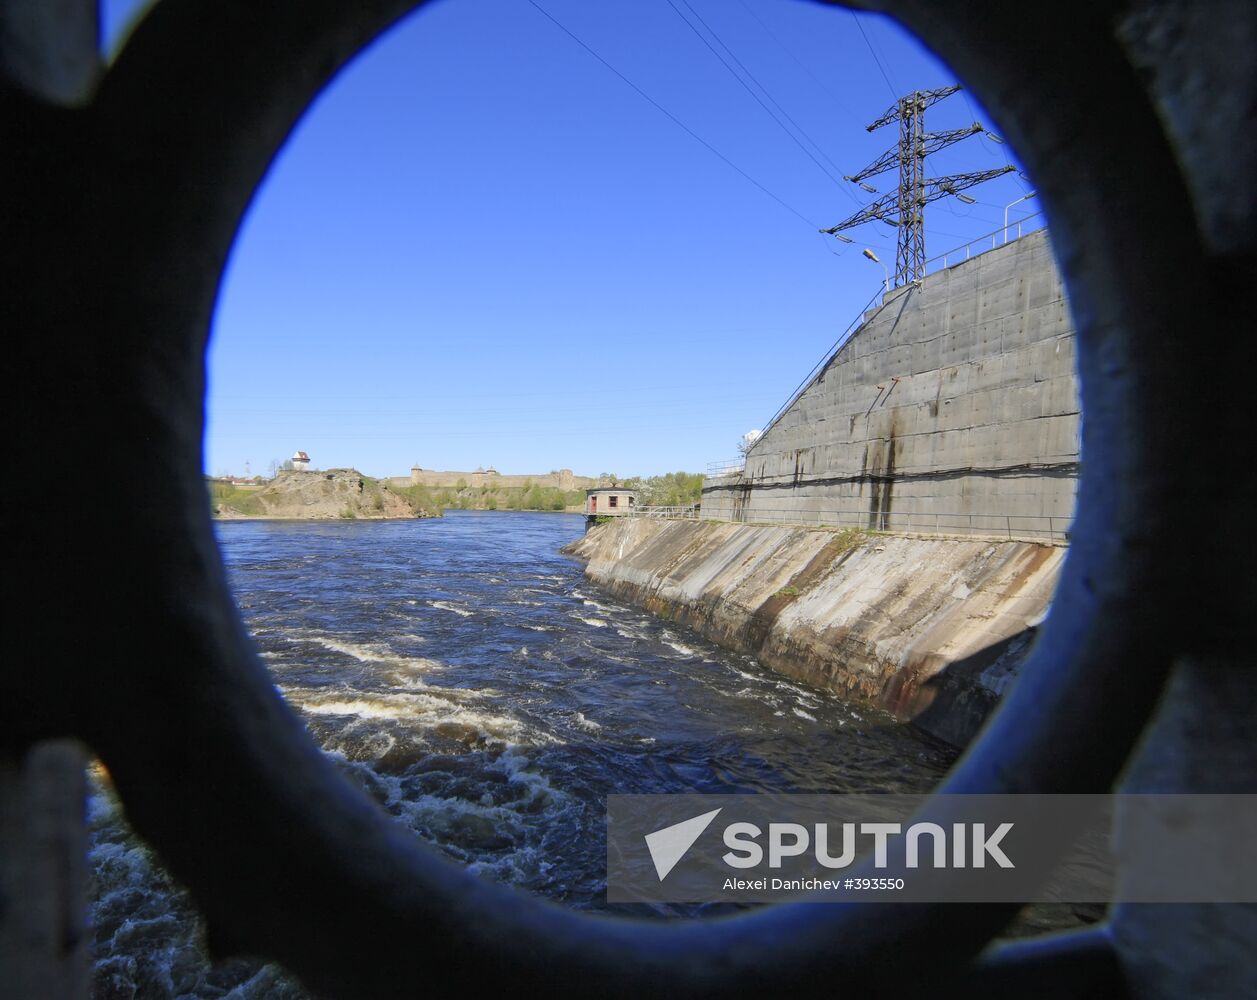 Narva hydro power station is 40